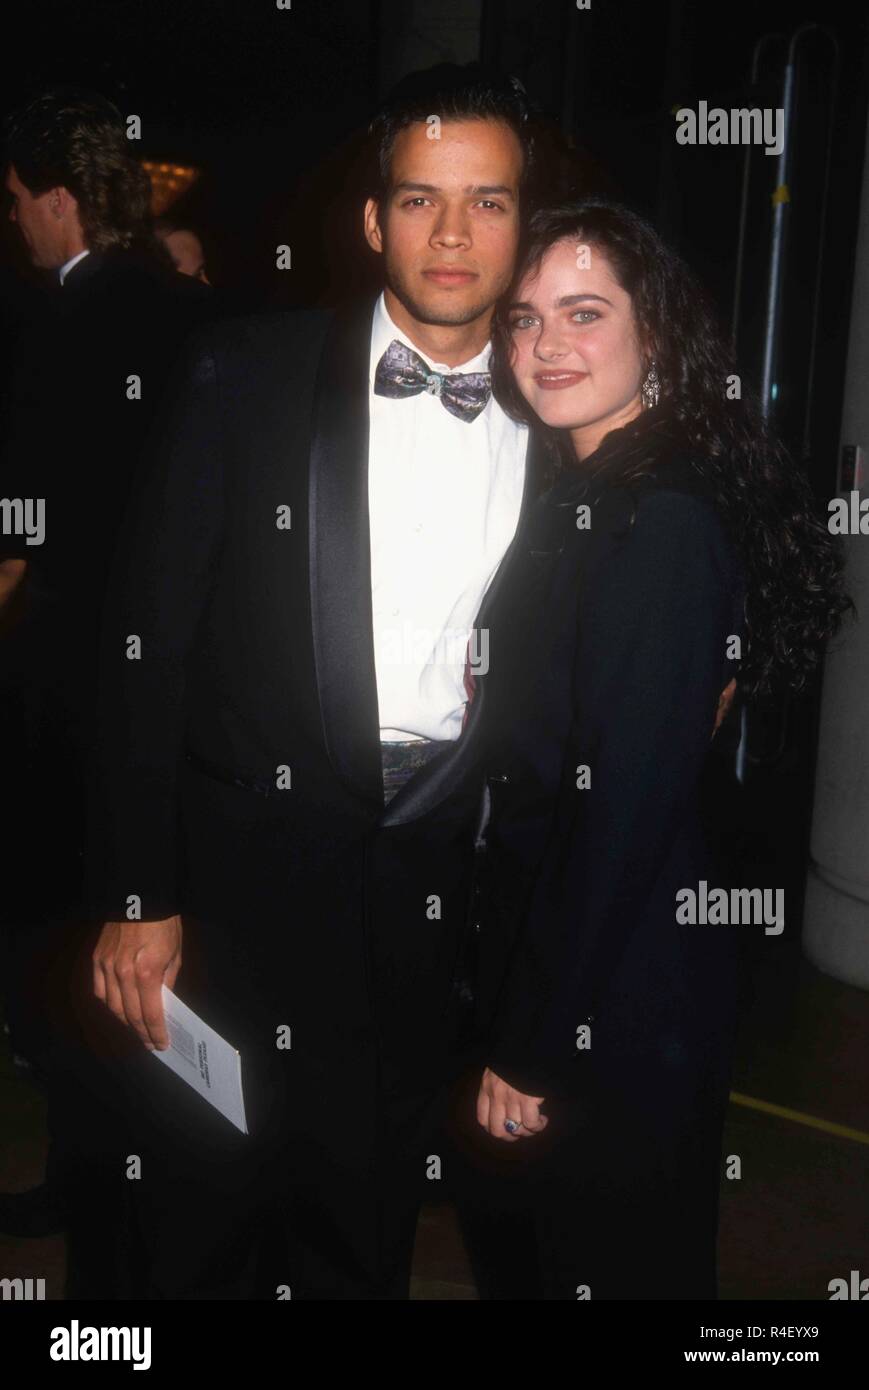 BEVERLY HILLS, CA - FEBRUARY 26: Actor Robert Fontaine attends the Ninth Annual Soap Opera Digest Awards on February 26, 1993 at the Beverly Hilton Hotel in Beverly Hills, California. Photo by Barry King/Alamy Stock Photo Stock Photo